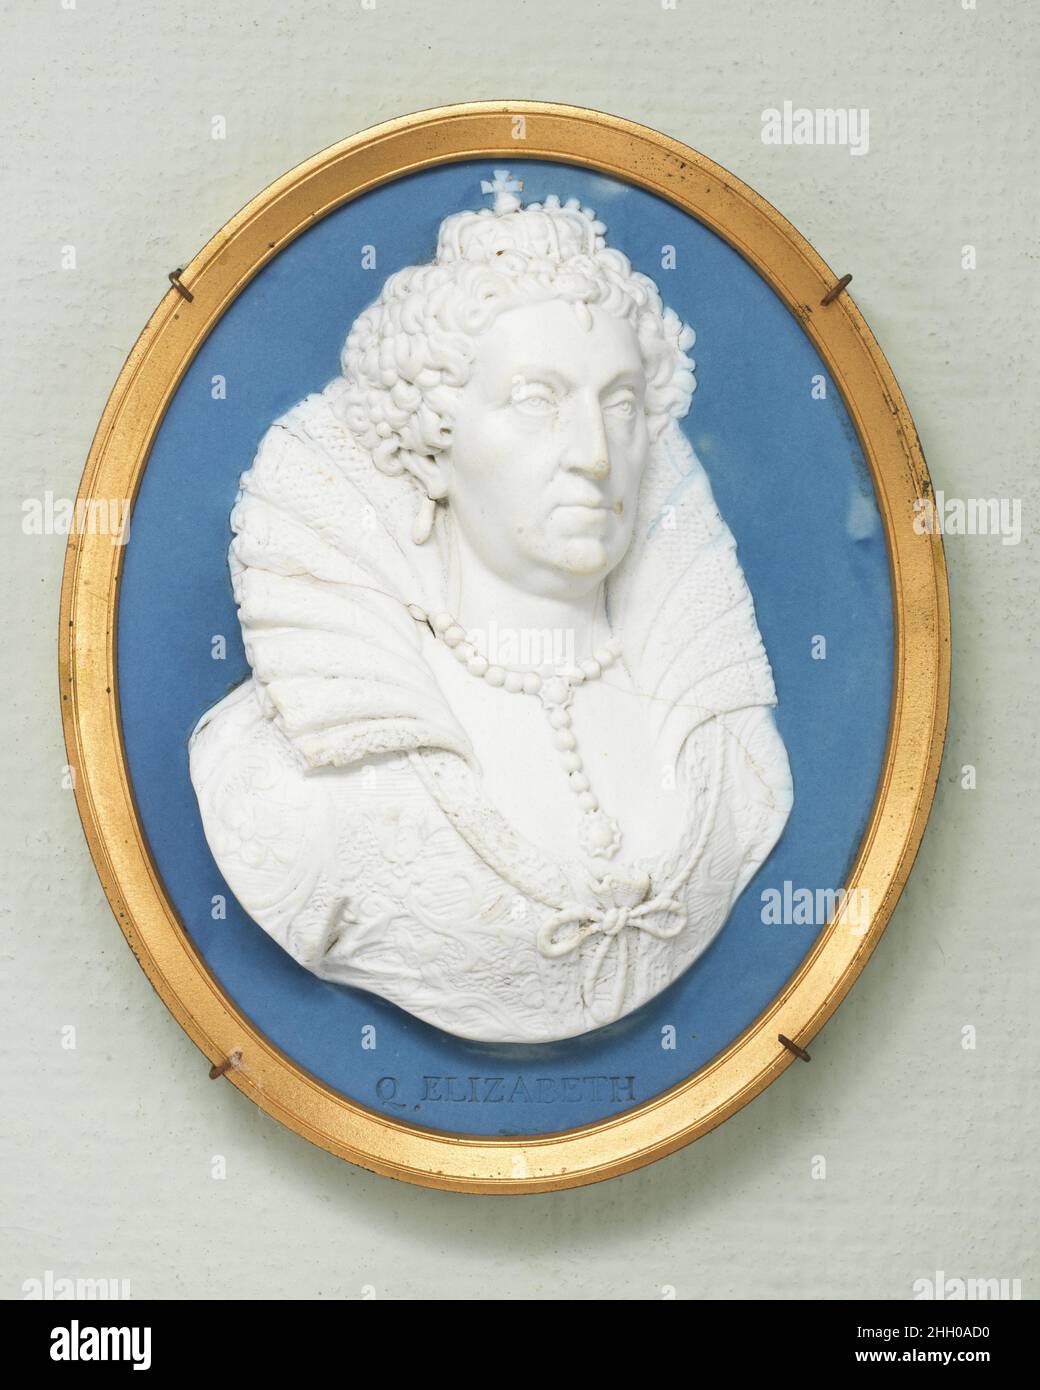 Elizabeth I 18th century Wedgwood and Bentley Cameo medallions with portrait reliefs were made by Josiah Wedgwood between 1765 and 1795, with Thomas Bentley as his partner from 1769 to 1780. Black basalt and jasper are both types of fine stoneware hard enough for the delicate modeling which distinguishes Wedgwood's portrait cameos of 'Illustious Ancents and Moderns.'. Elizabeth I. British, Etruria, Staffordshire. 18th century. Jasperware. Wedgwood and Bentley (British, Etruria, Staffordshire, 1769–1780). Ceramics-Pottery Stock Photo